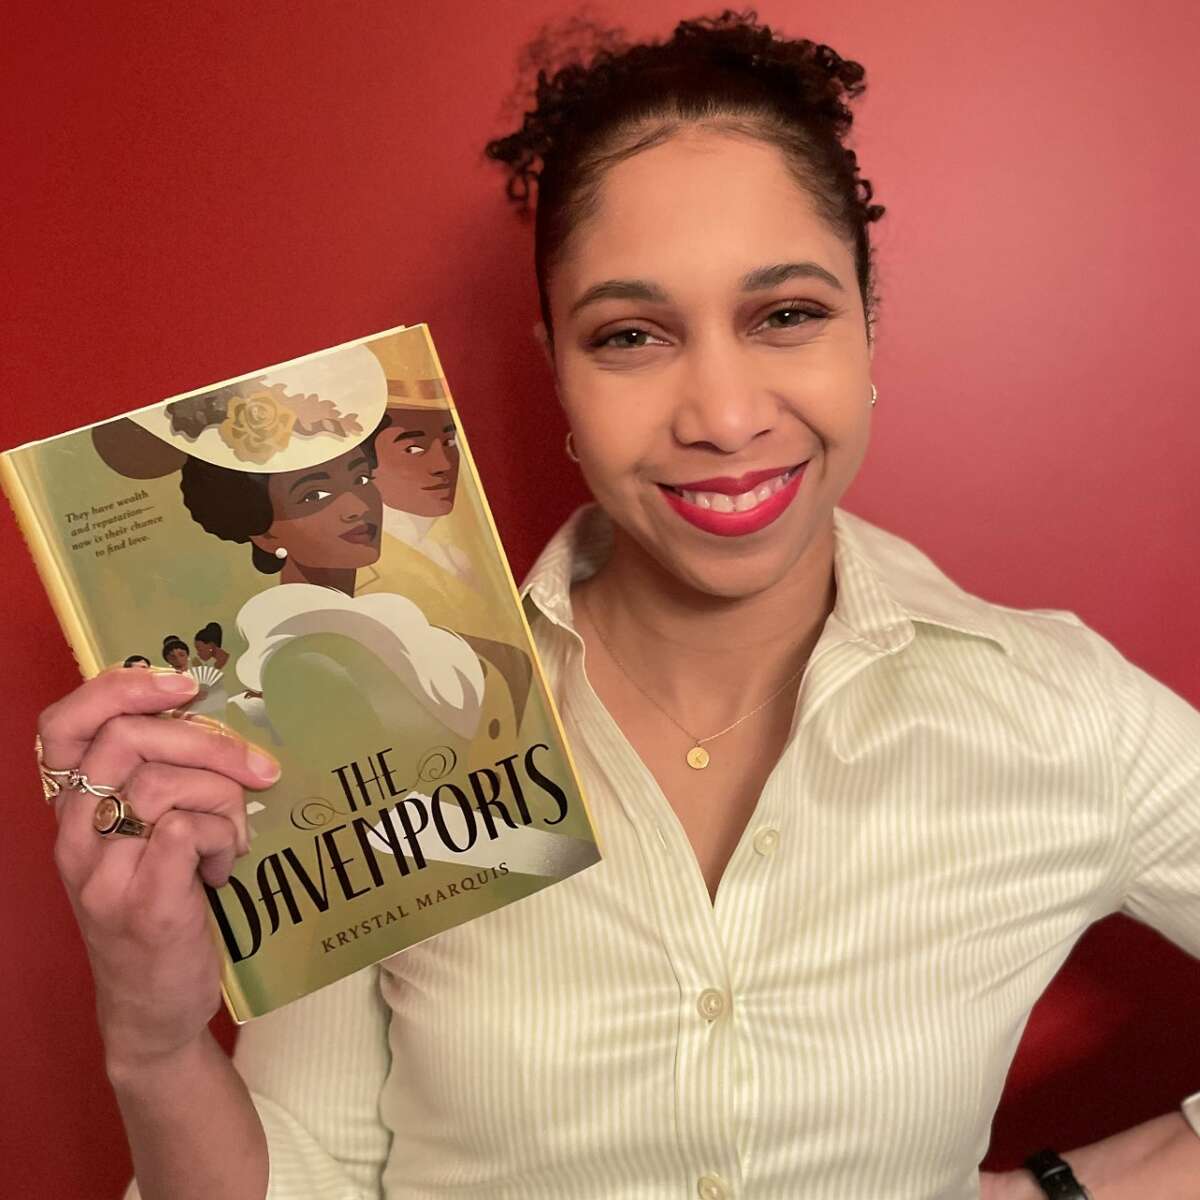 Krystal Marquis, an environmental, health and safety manager from Terryville, published her first novel, "The Davenports" on Jan. 31.